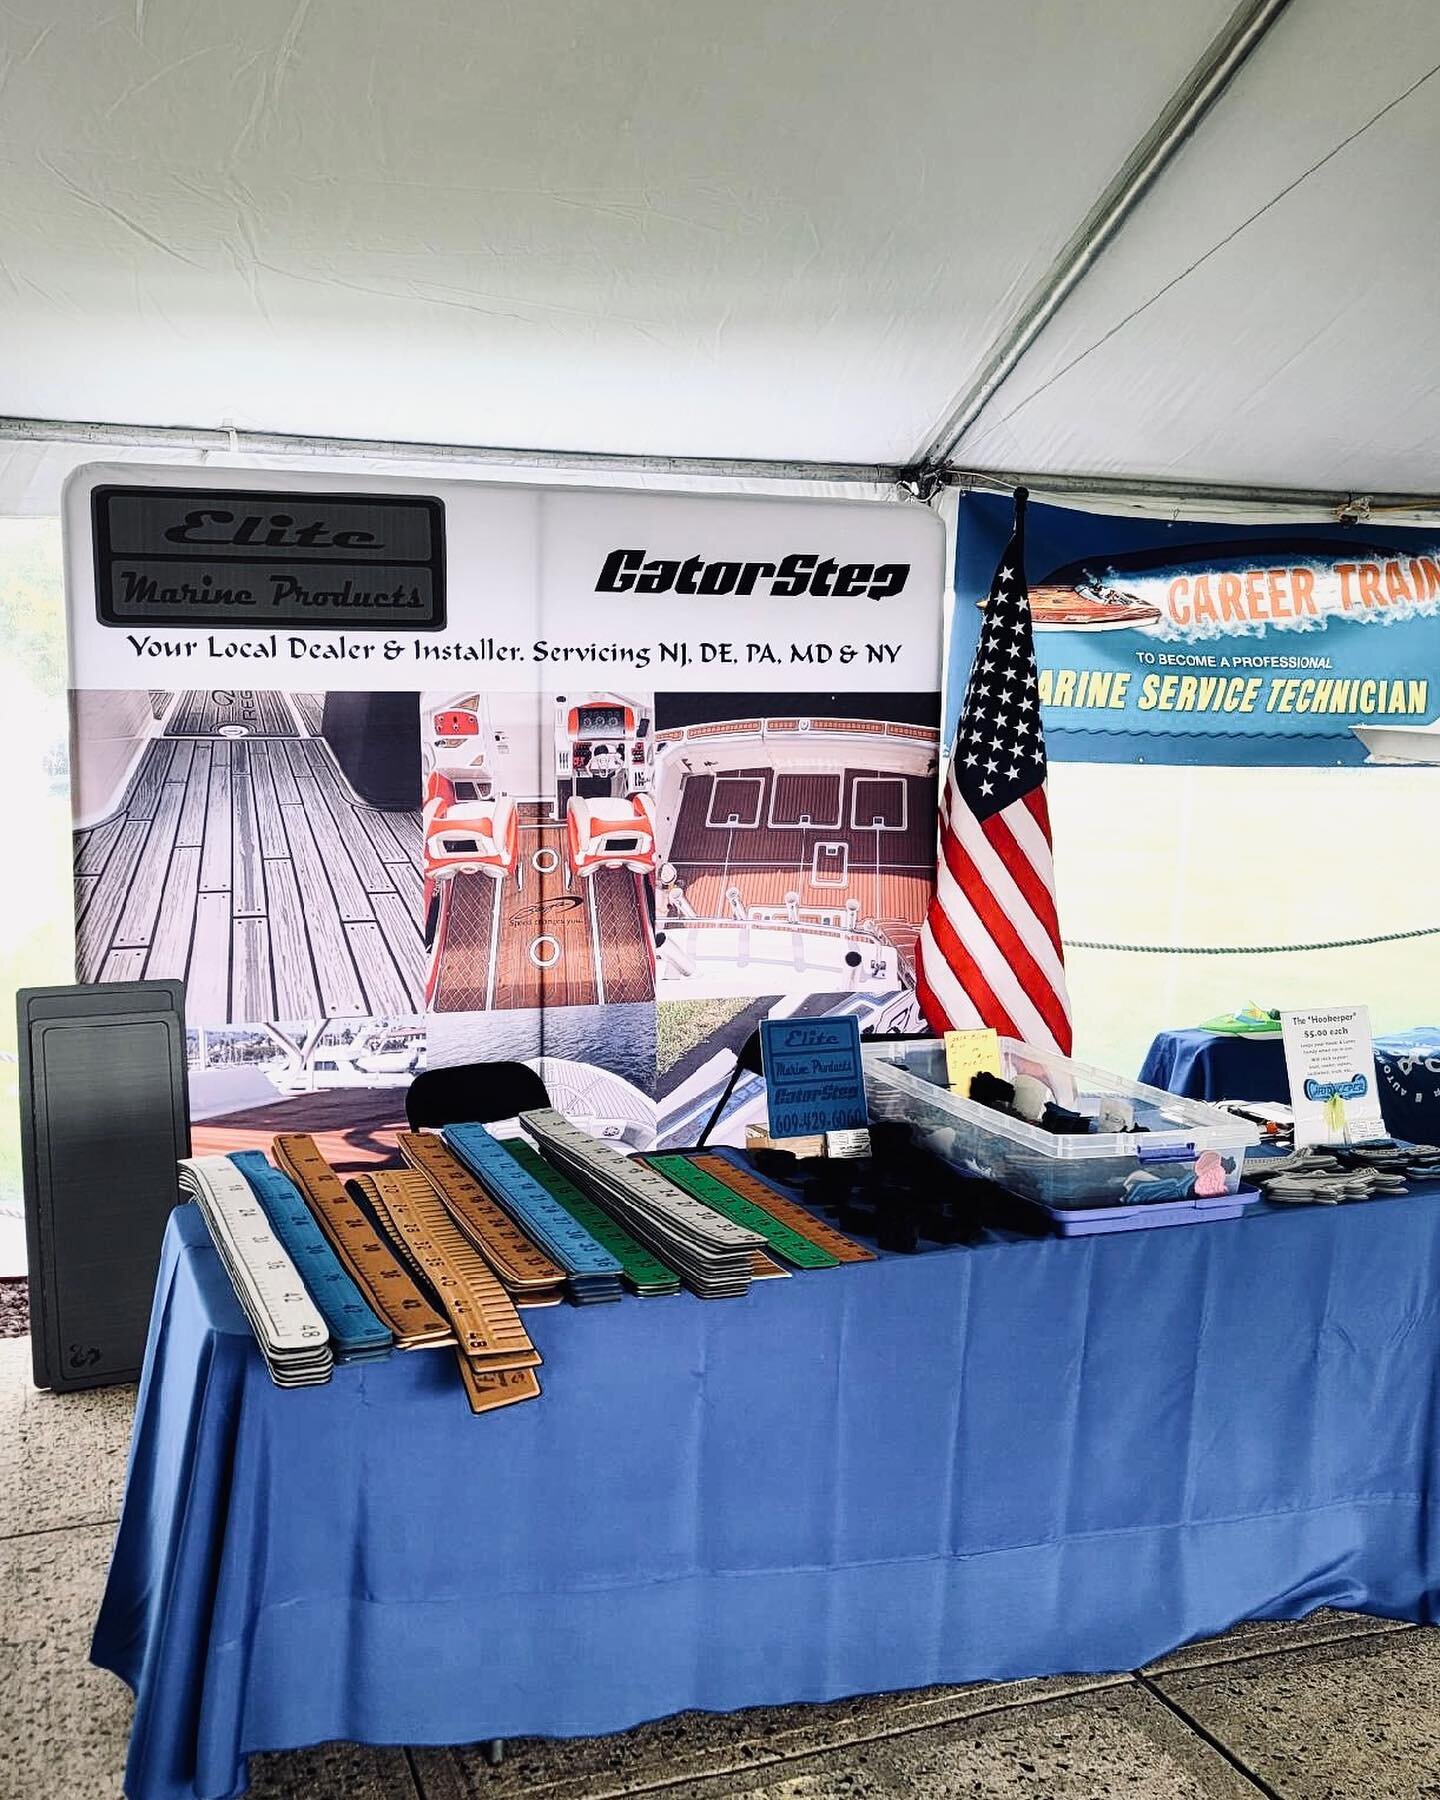 The skies are clear &amp; we&rsquo;re all set up @jerseyboatexpo 
⚓️🚤🛥️⛵️⚓️
Stop by &amp; see us for you @gatorstepfs @gatorstepit #boatflooring needs! 
We also have our ruler s📏 ready for you to purchase to measure your big catch 🎣 
#elitemarine